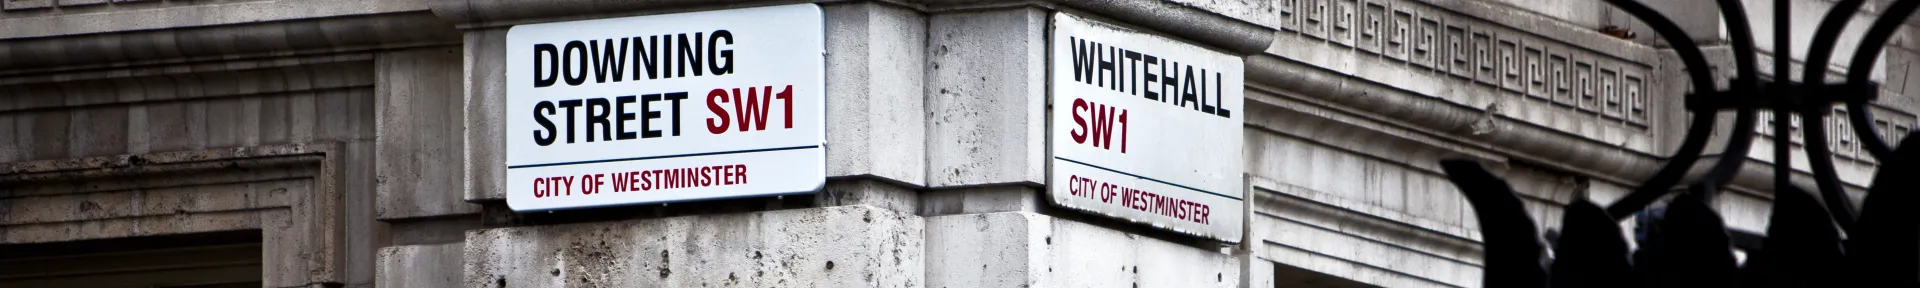 Downing street and Whitehall street signs